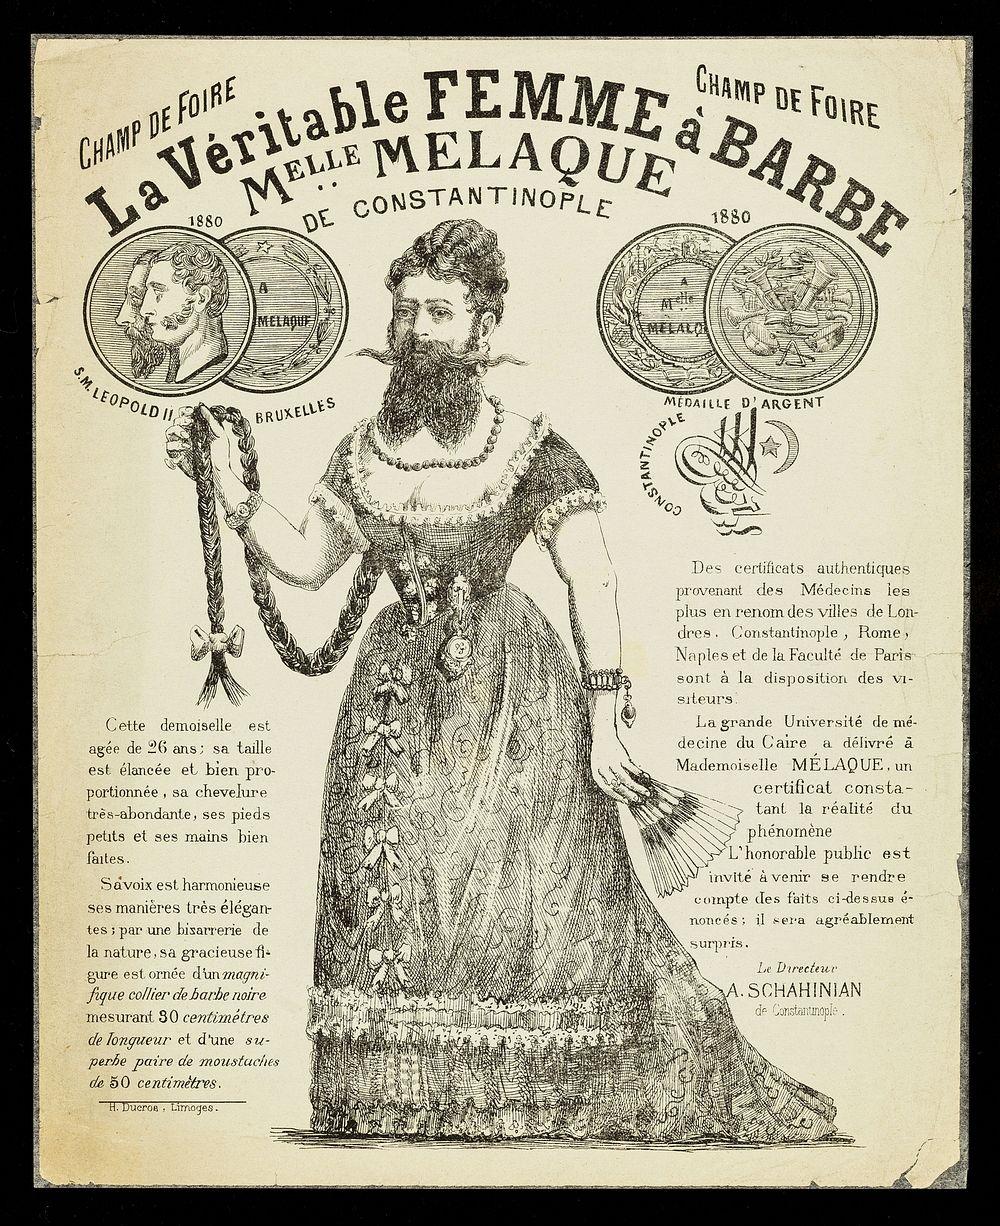 [Leaflet advertising bearded lady, Mlle. Melaque from Constantinople, appearing at the Champ de Foire (Paris)].